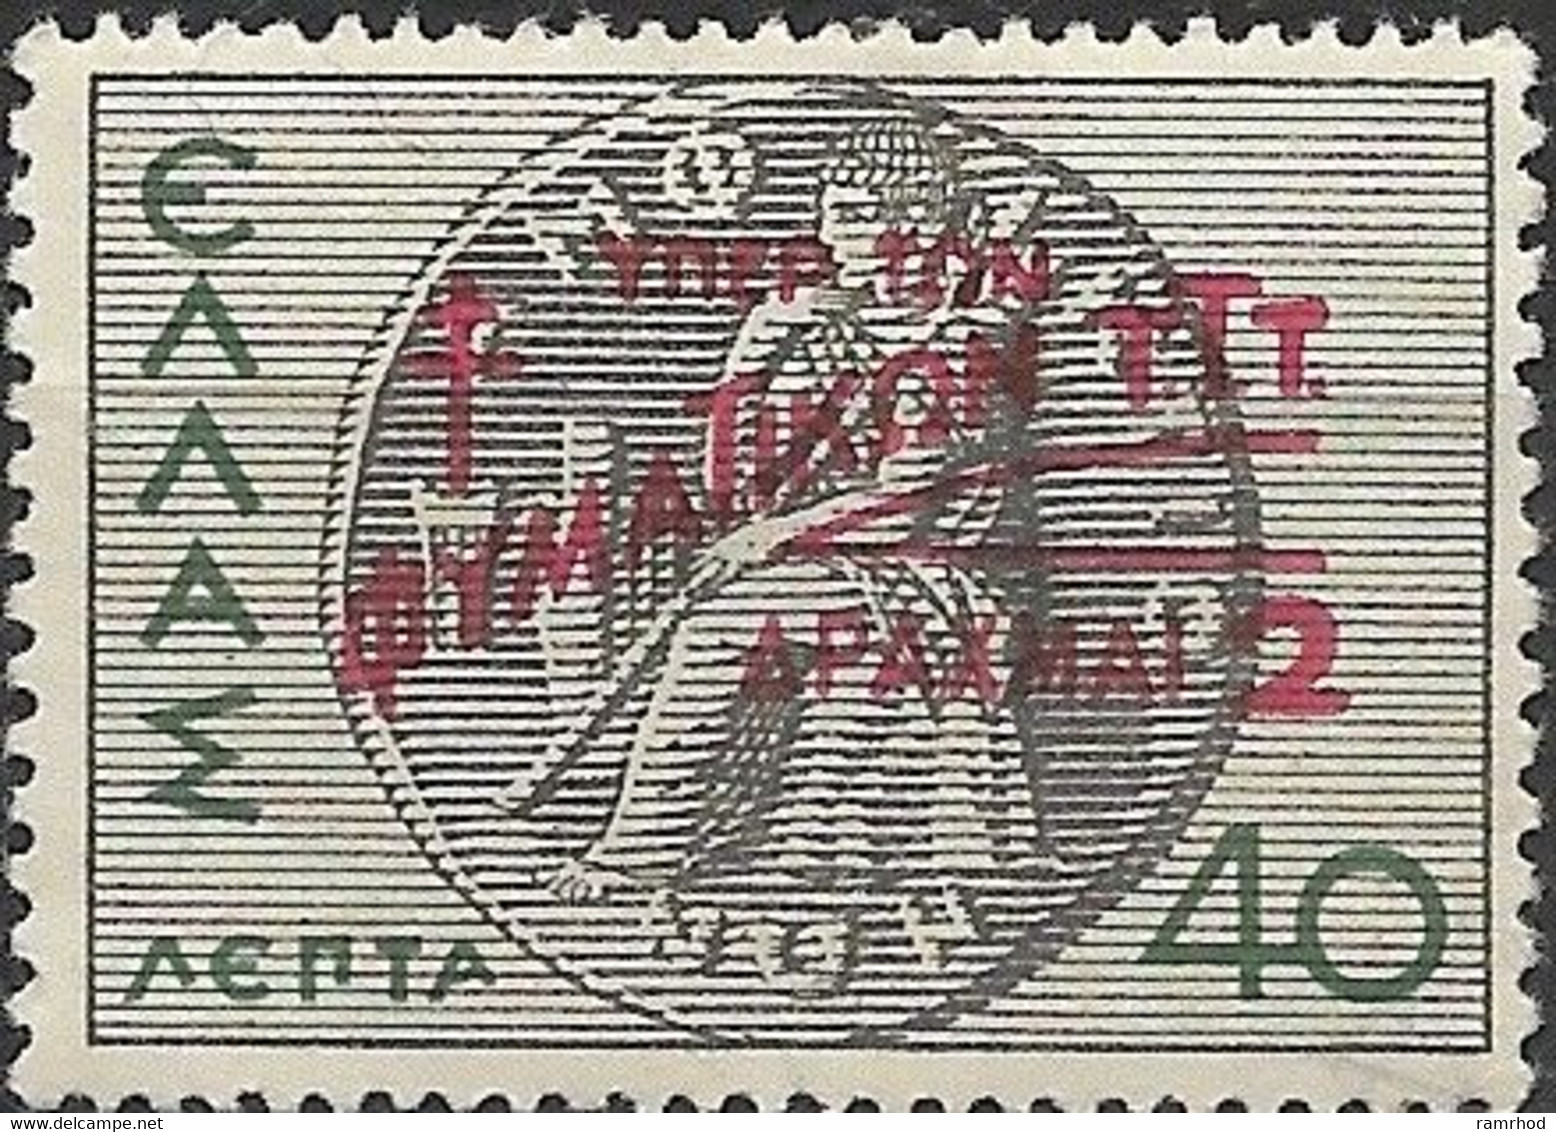 GREECE 1944 Charity Tax Stamp - Postal Staff Anti-tuberculosis Fund - 2d. On 40l Grey And Green MH - Bienfaisance